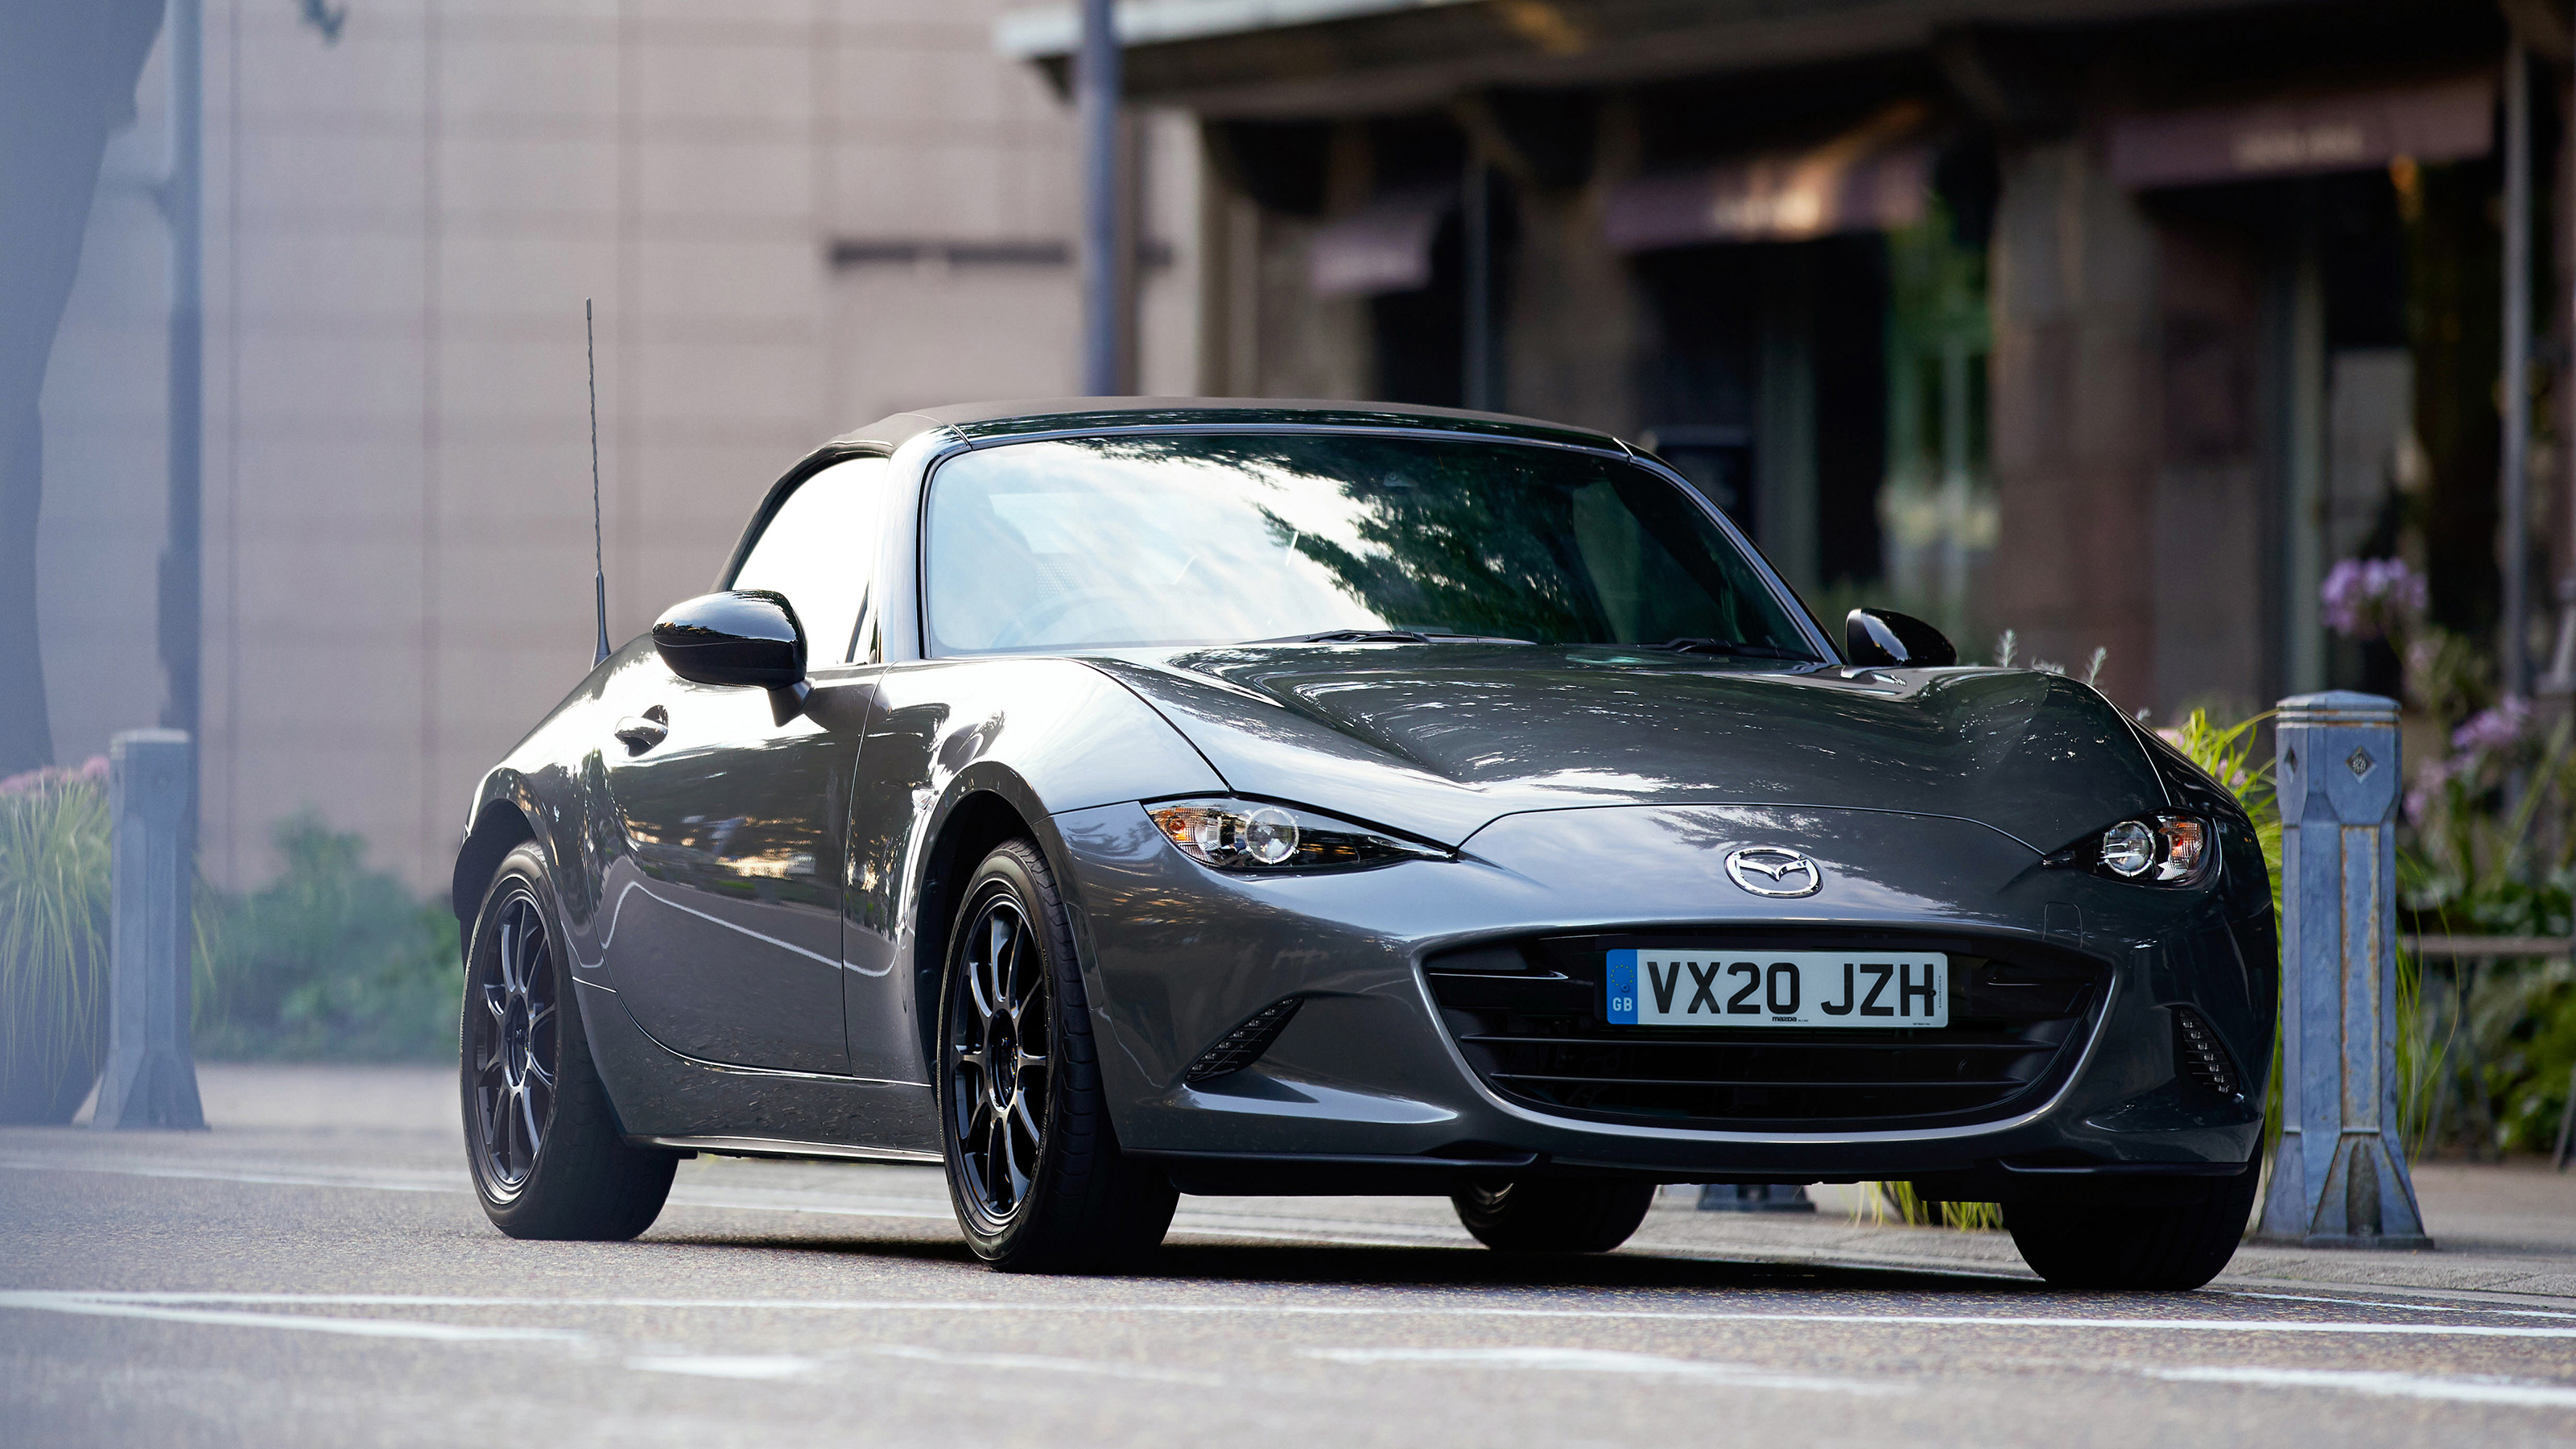 New limited edition Mazda MX-5 R Sport revealed for 2020 